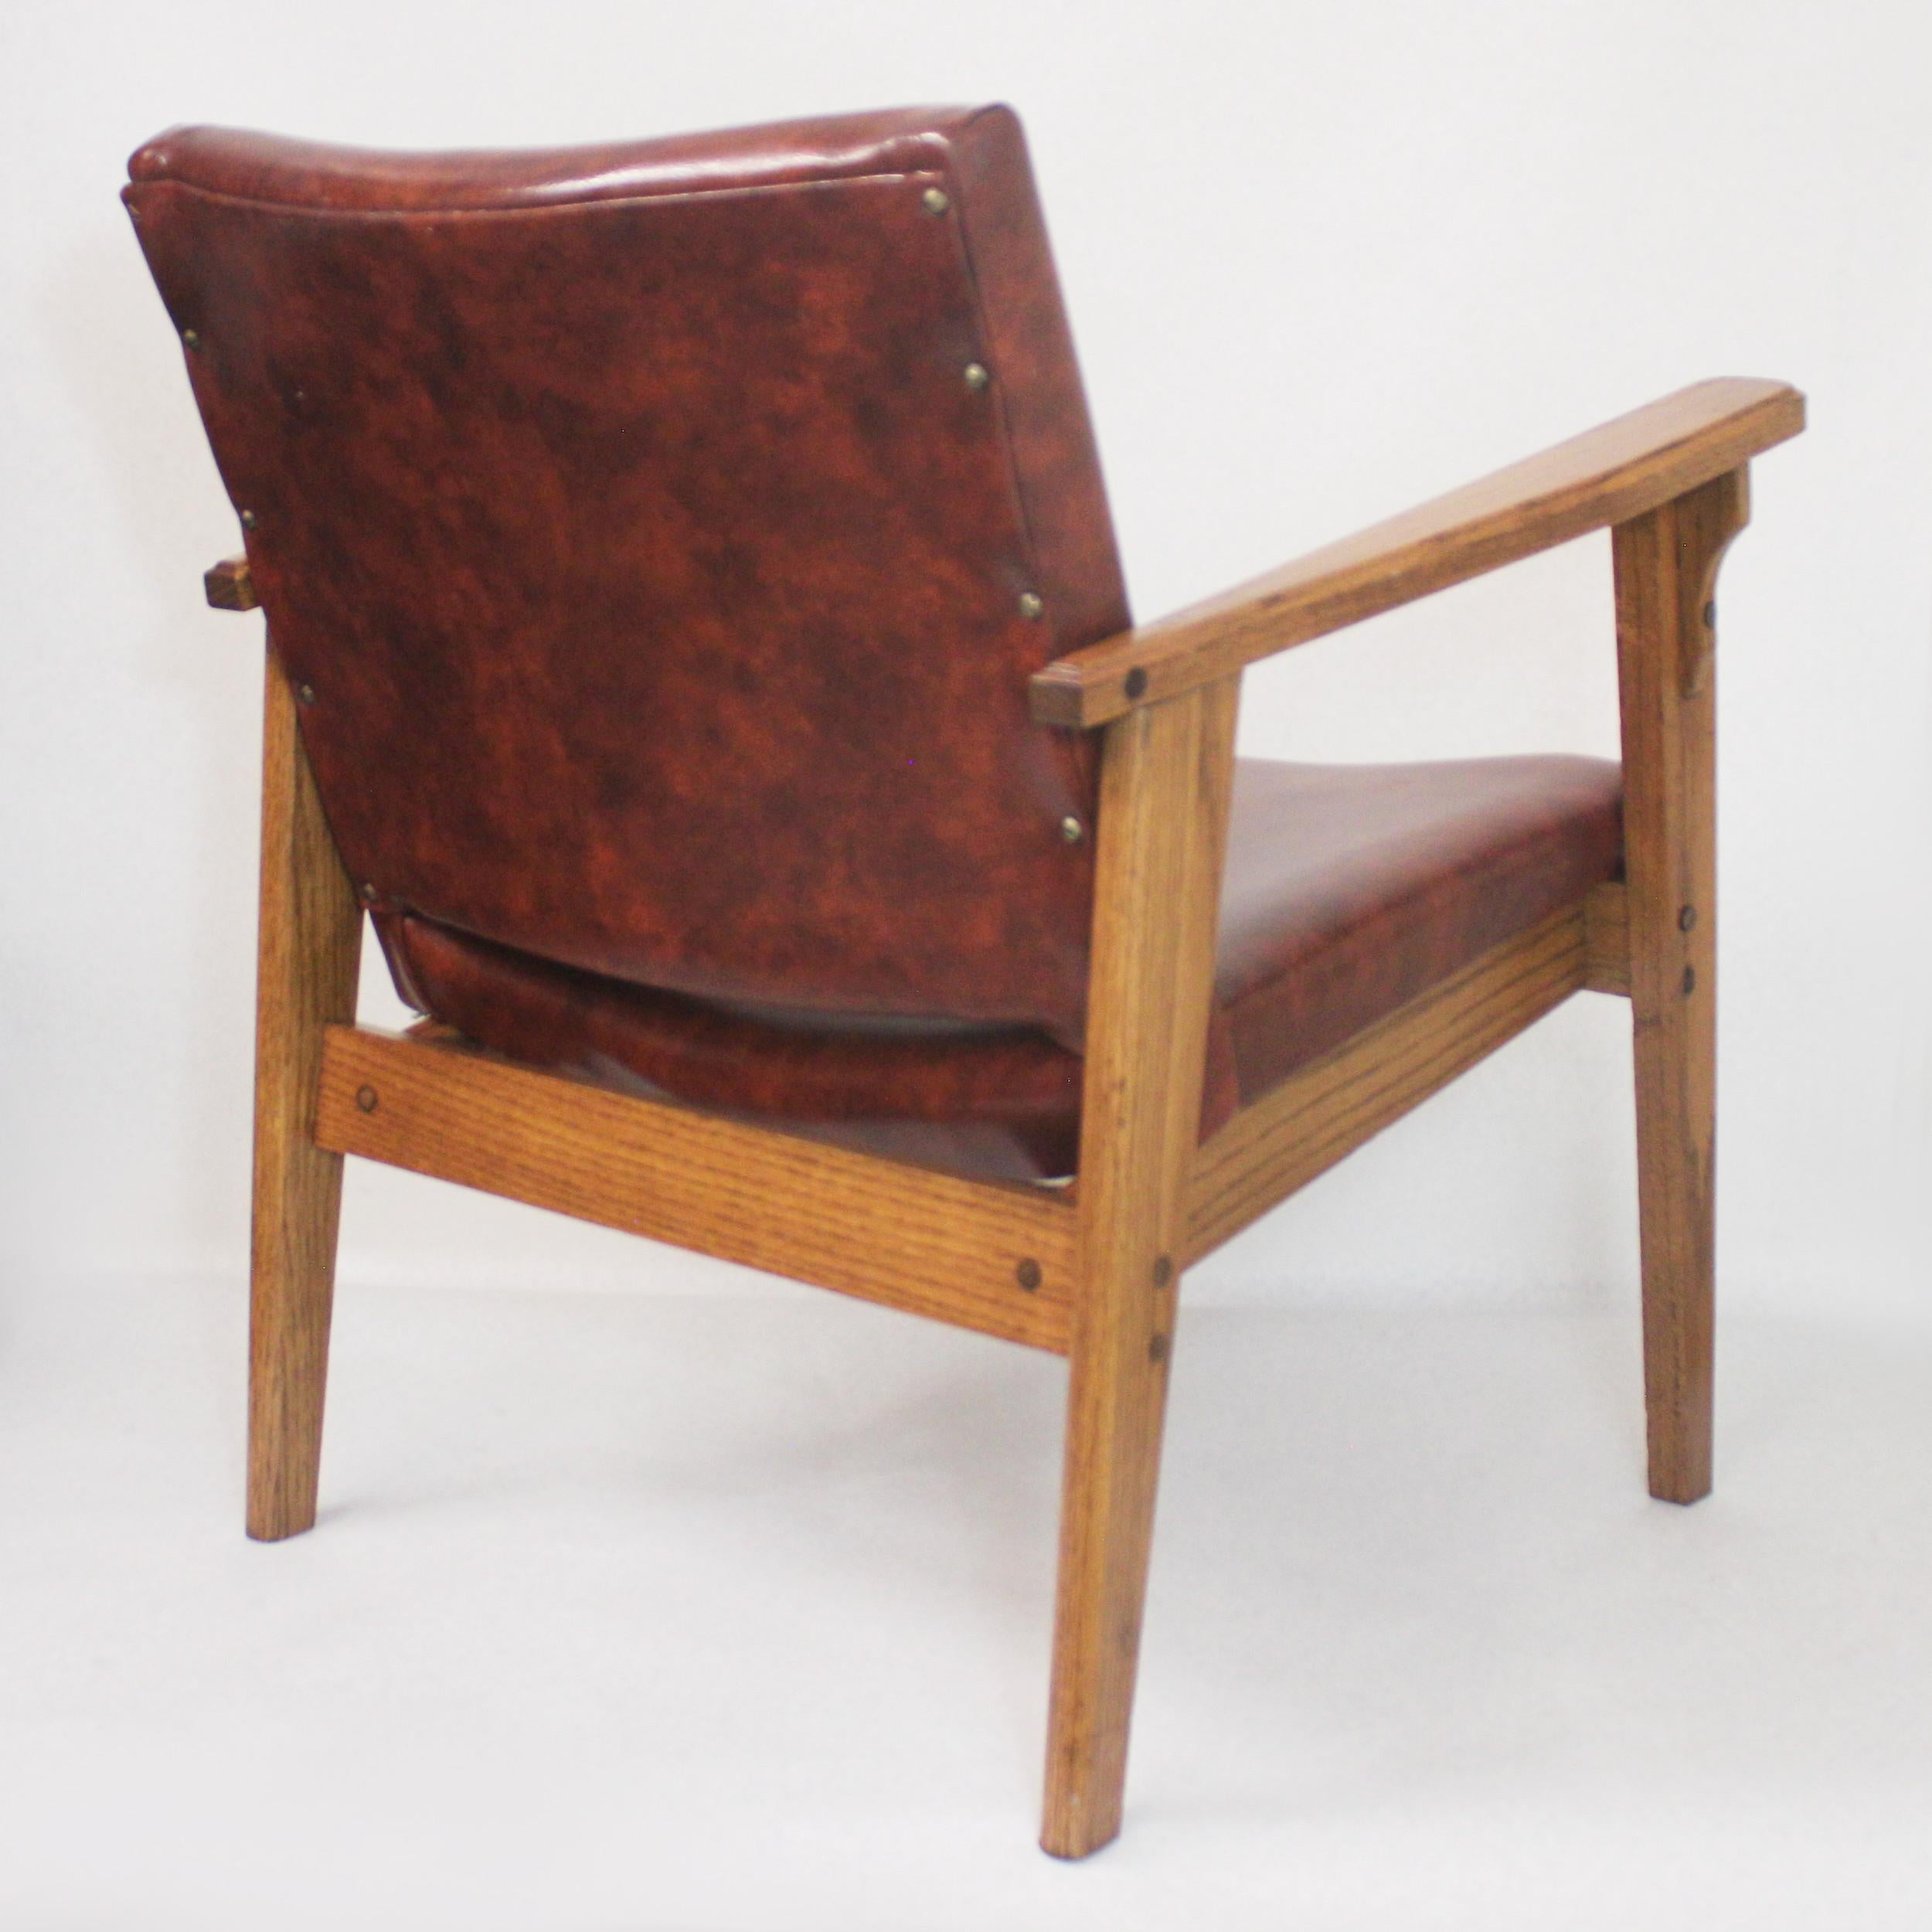 Mid-20th Century Vintage Mid-Century Modern Ranch Oak Side Chairs from Yellowstone National Park